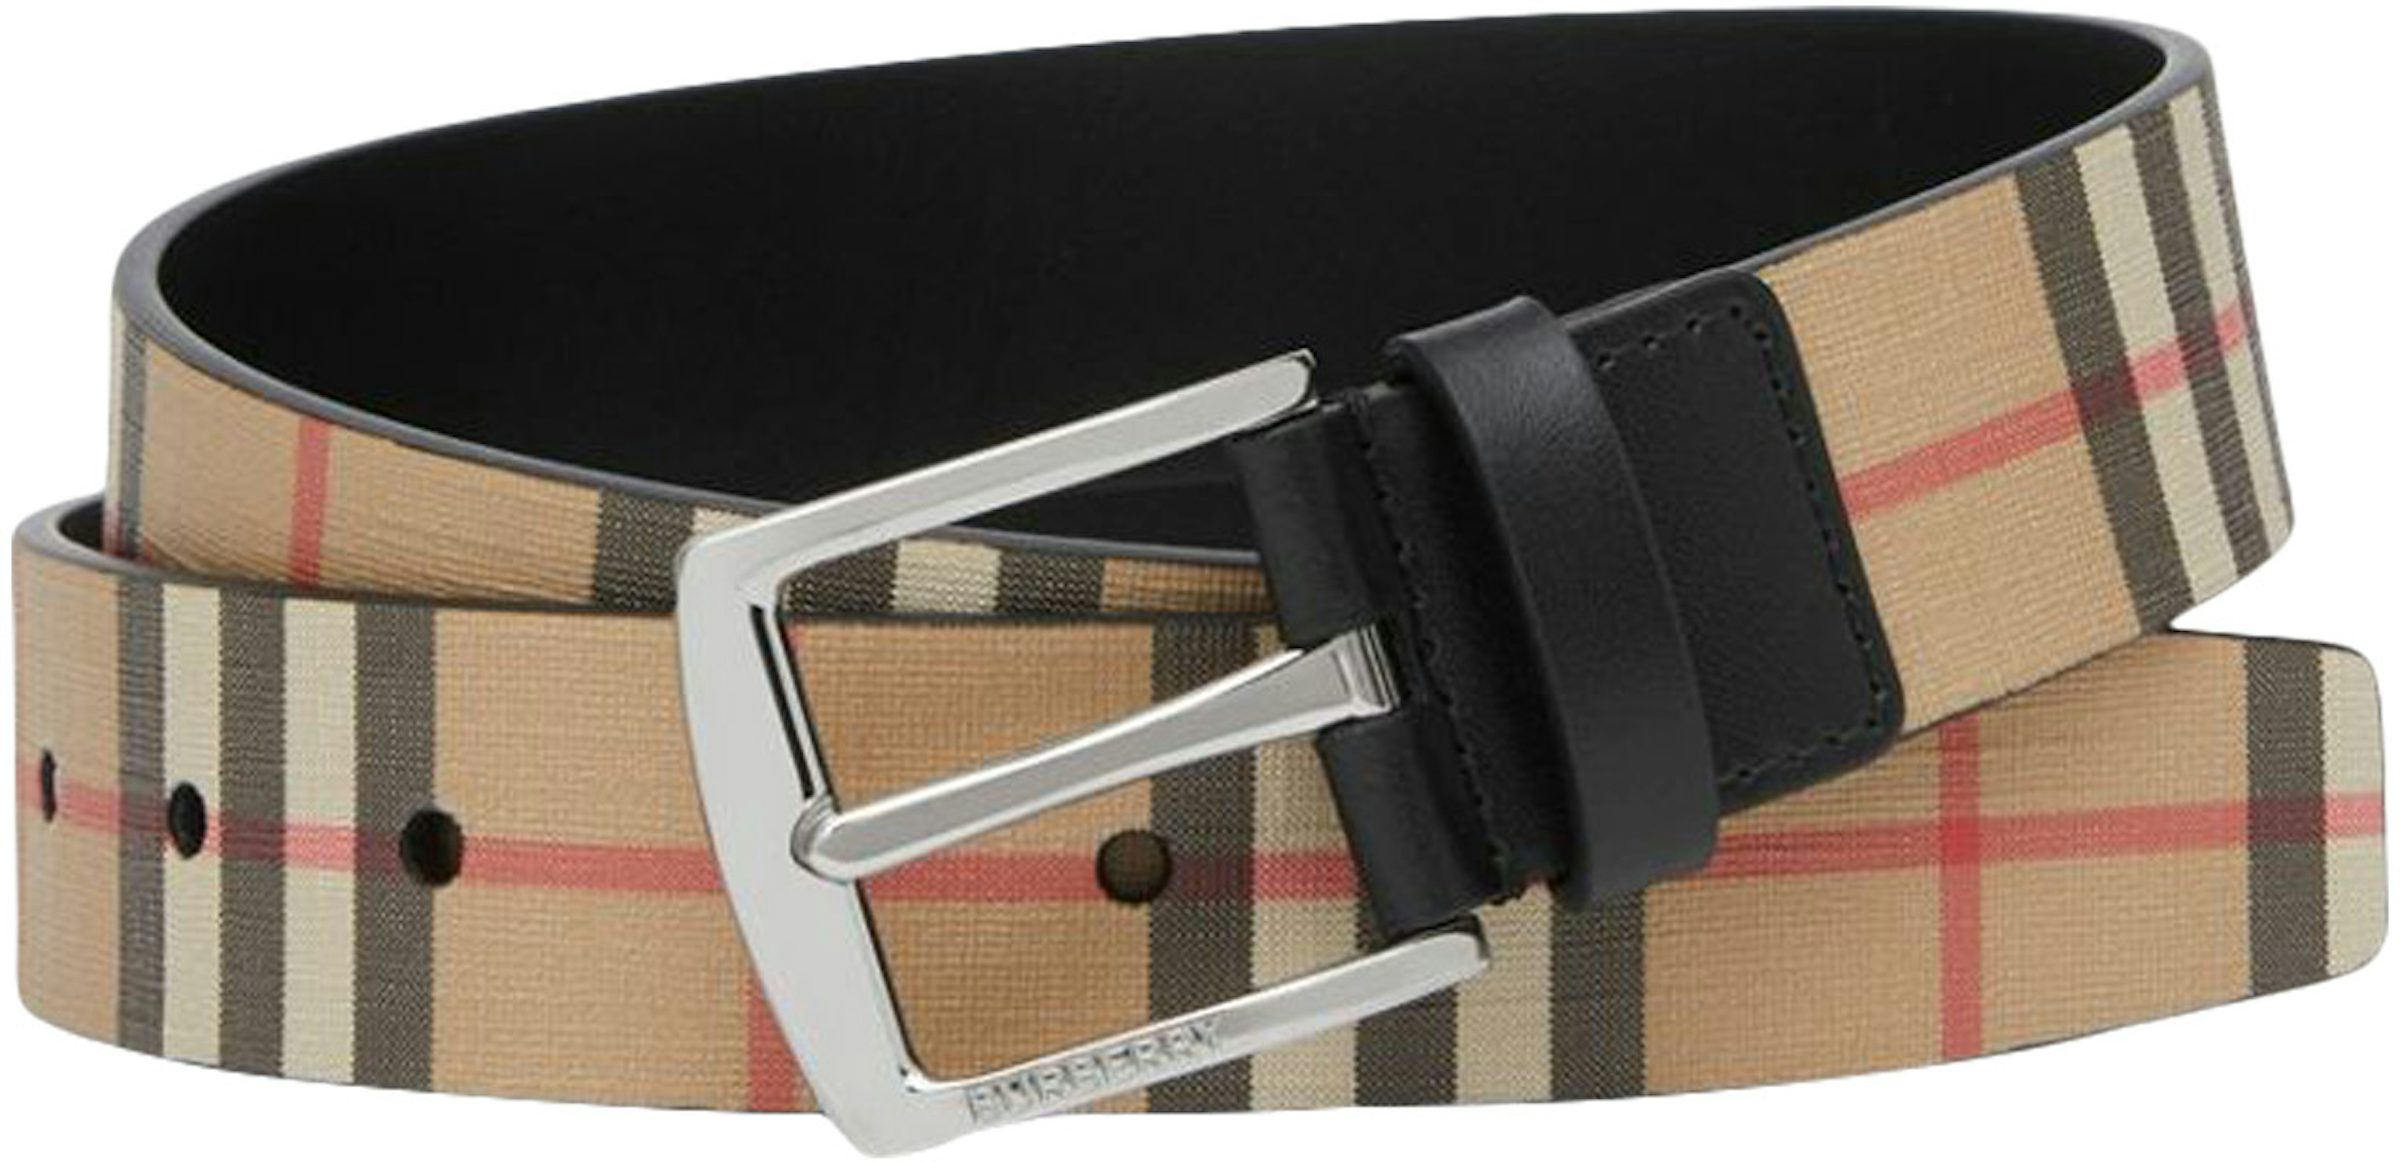 Burberry Black/Beige Beat Check Coated Canvas Reversible Buckle